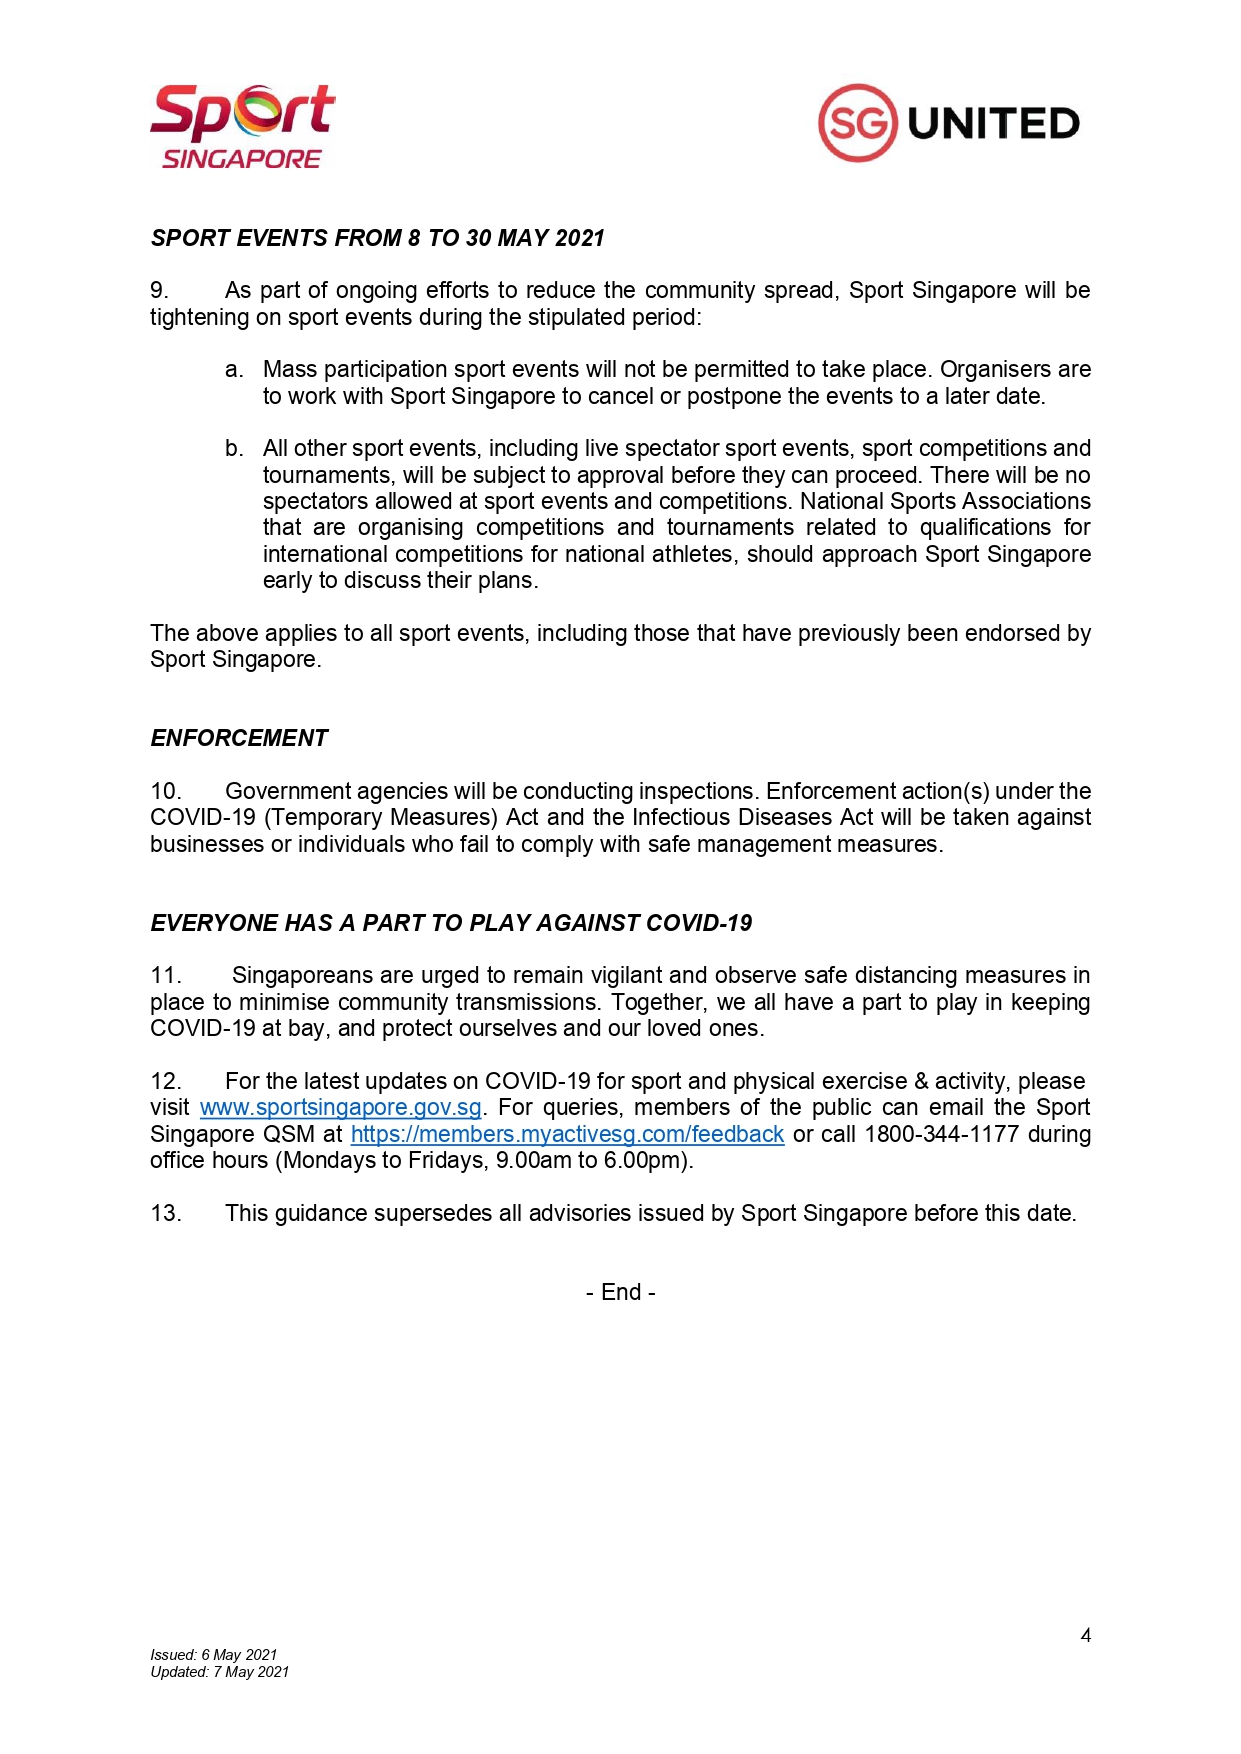 (Updated As Of 7 May 2021) Stricter Safe Management Measures For Sport And Physical Exercise and Activity (8 to 30 May)_pages-to-jpg-0004